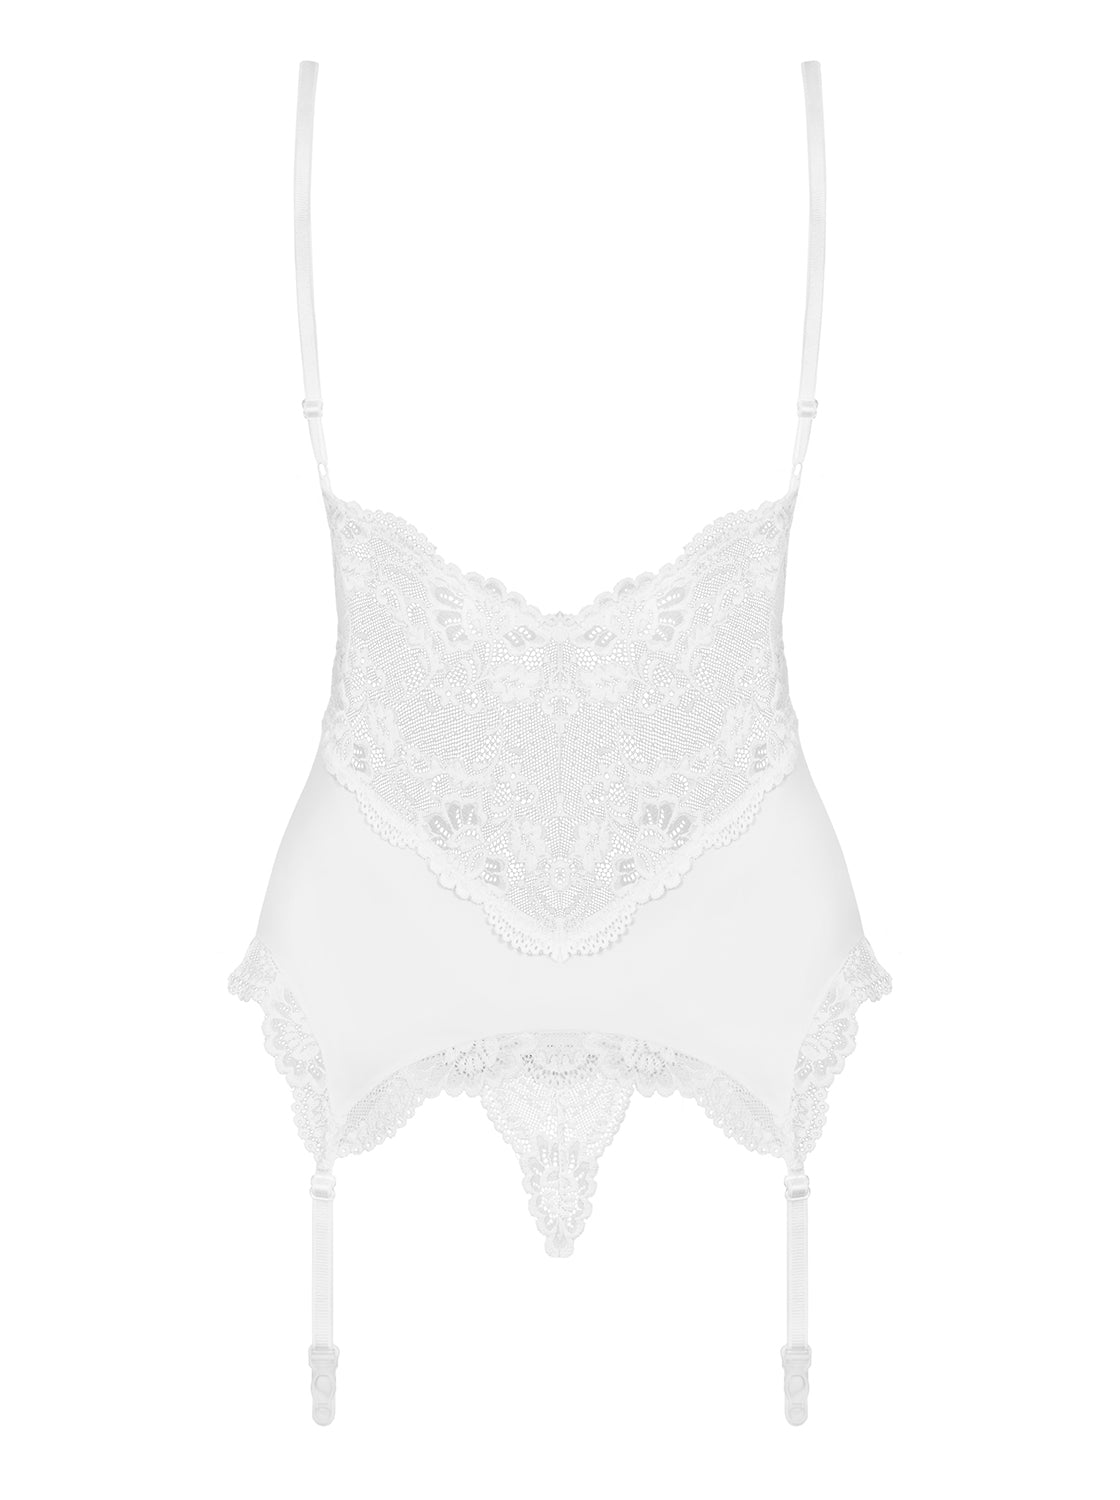 White corset with floral lace